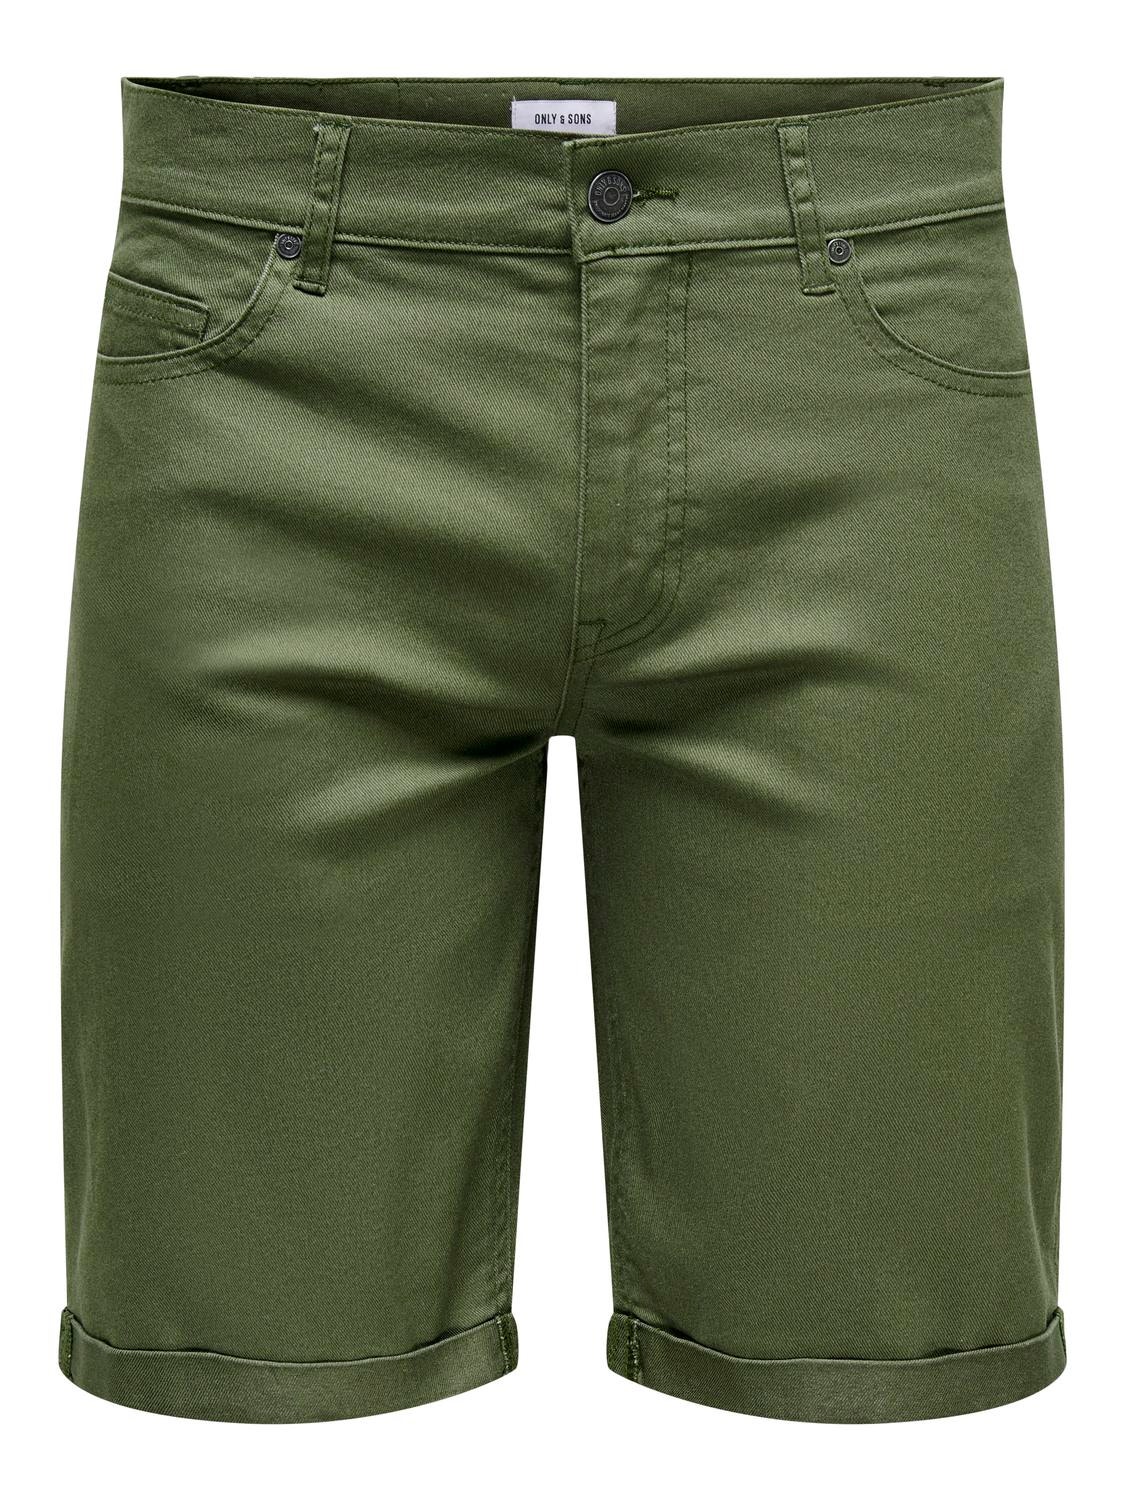 ONLY & SONS ONSPLY LIFE REG TWILL 4451 SHORTS -Olive Night - 22024451